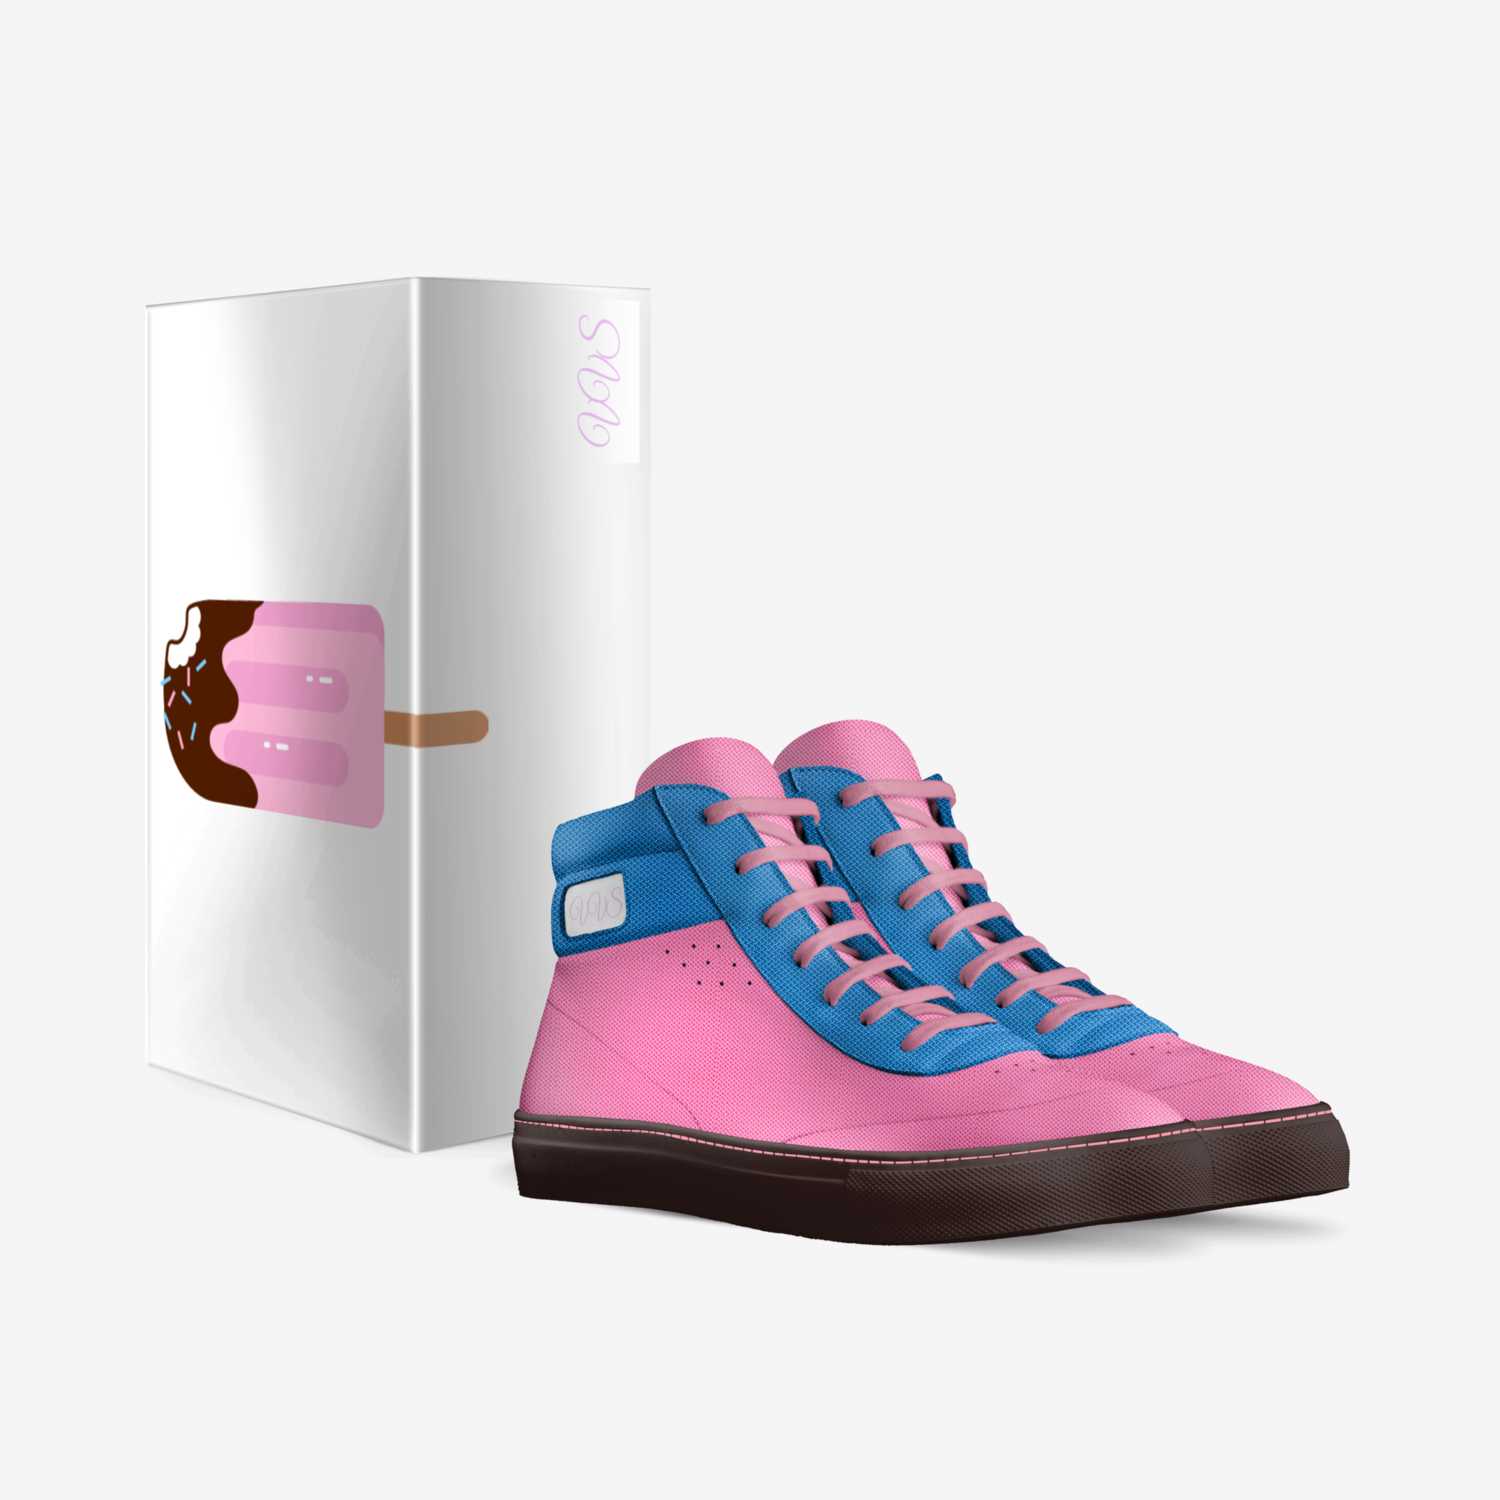 DROPZ (Ice Cream) custom made in Italy shoes by Tyrone Wood | Box view